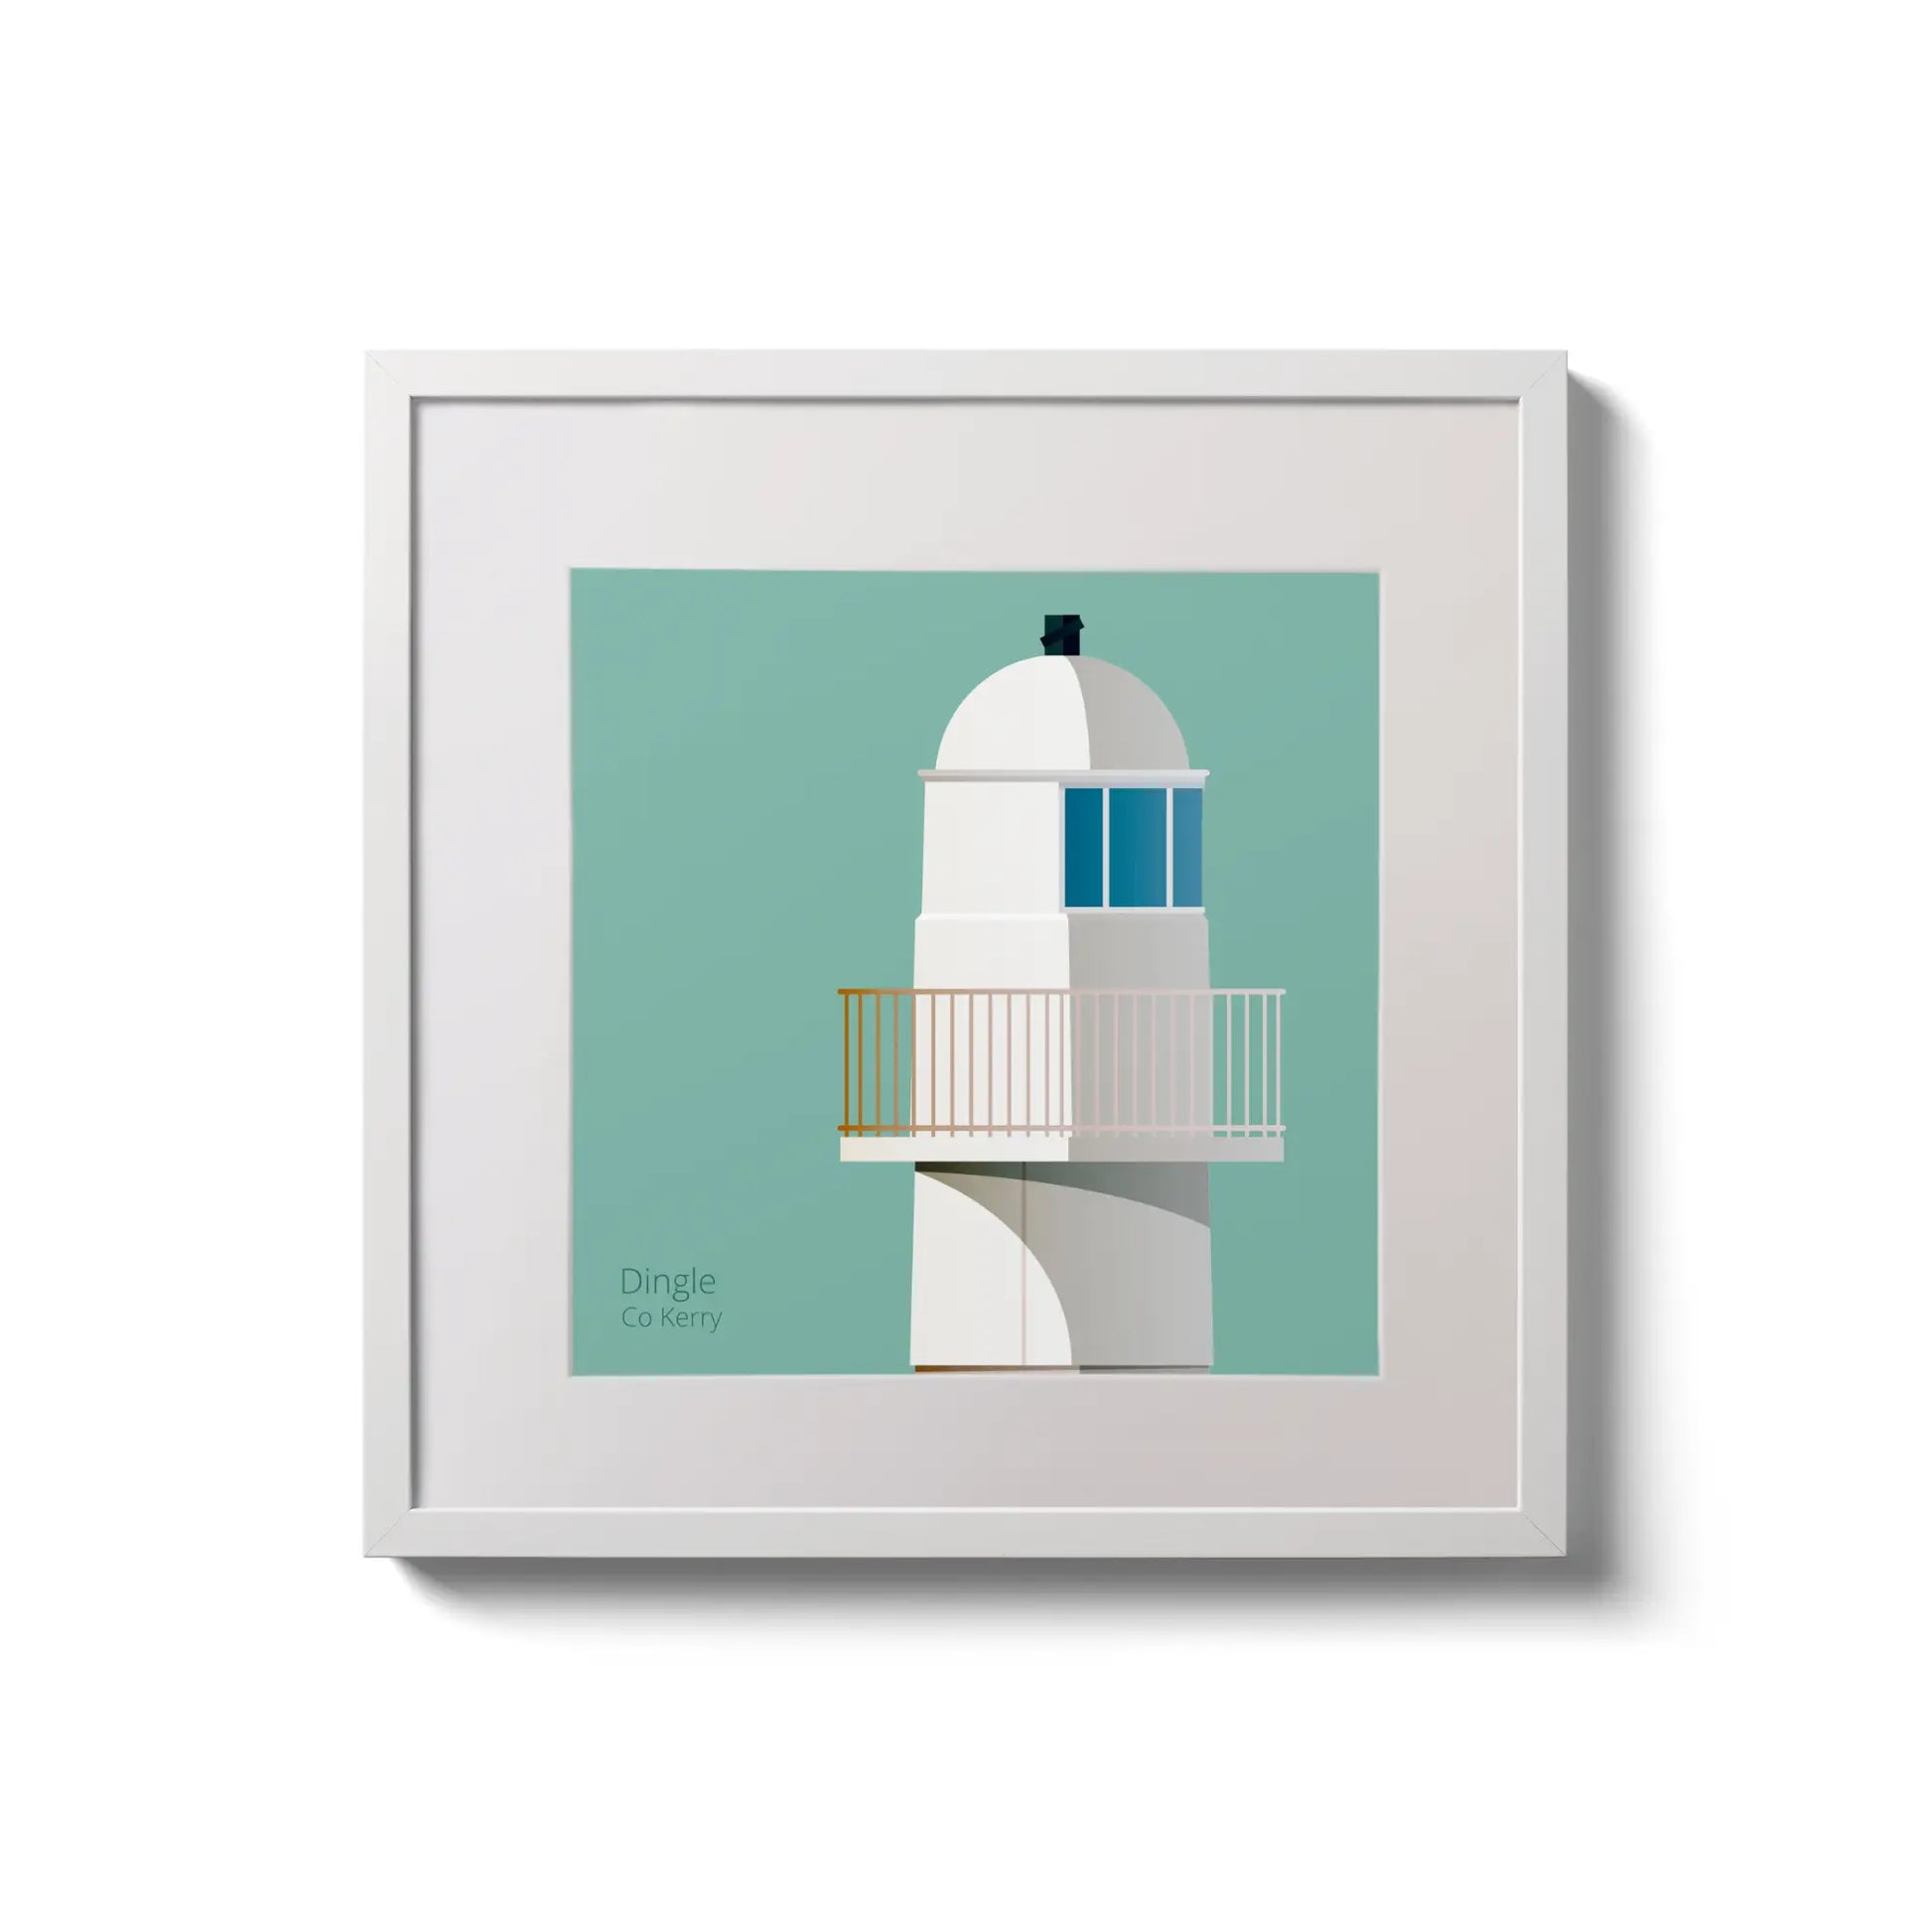 Illustration of Dingle lighthouse on an ocean green background,  in a white square frame measuring 20x20cm.